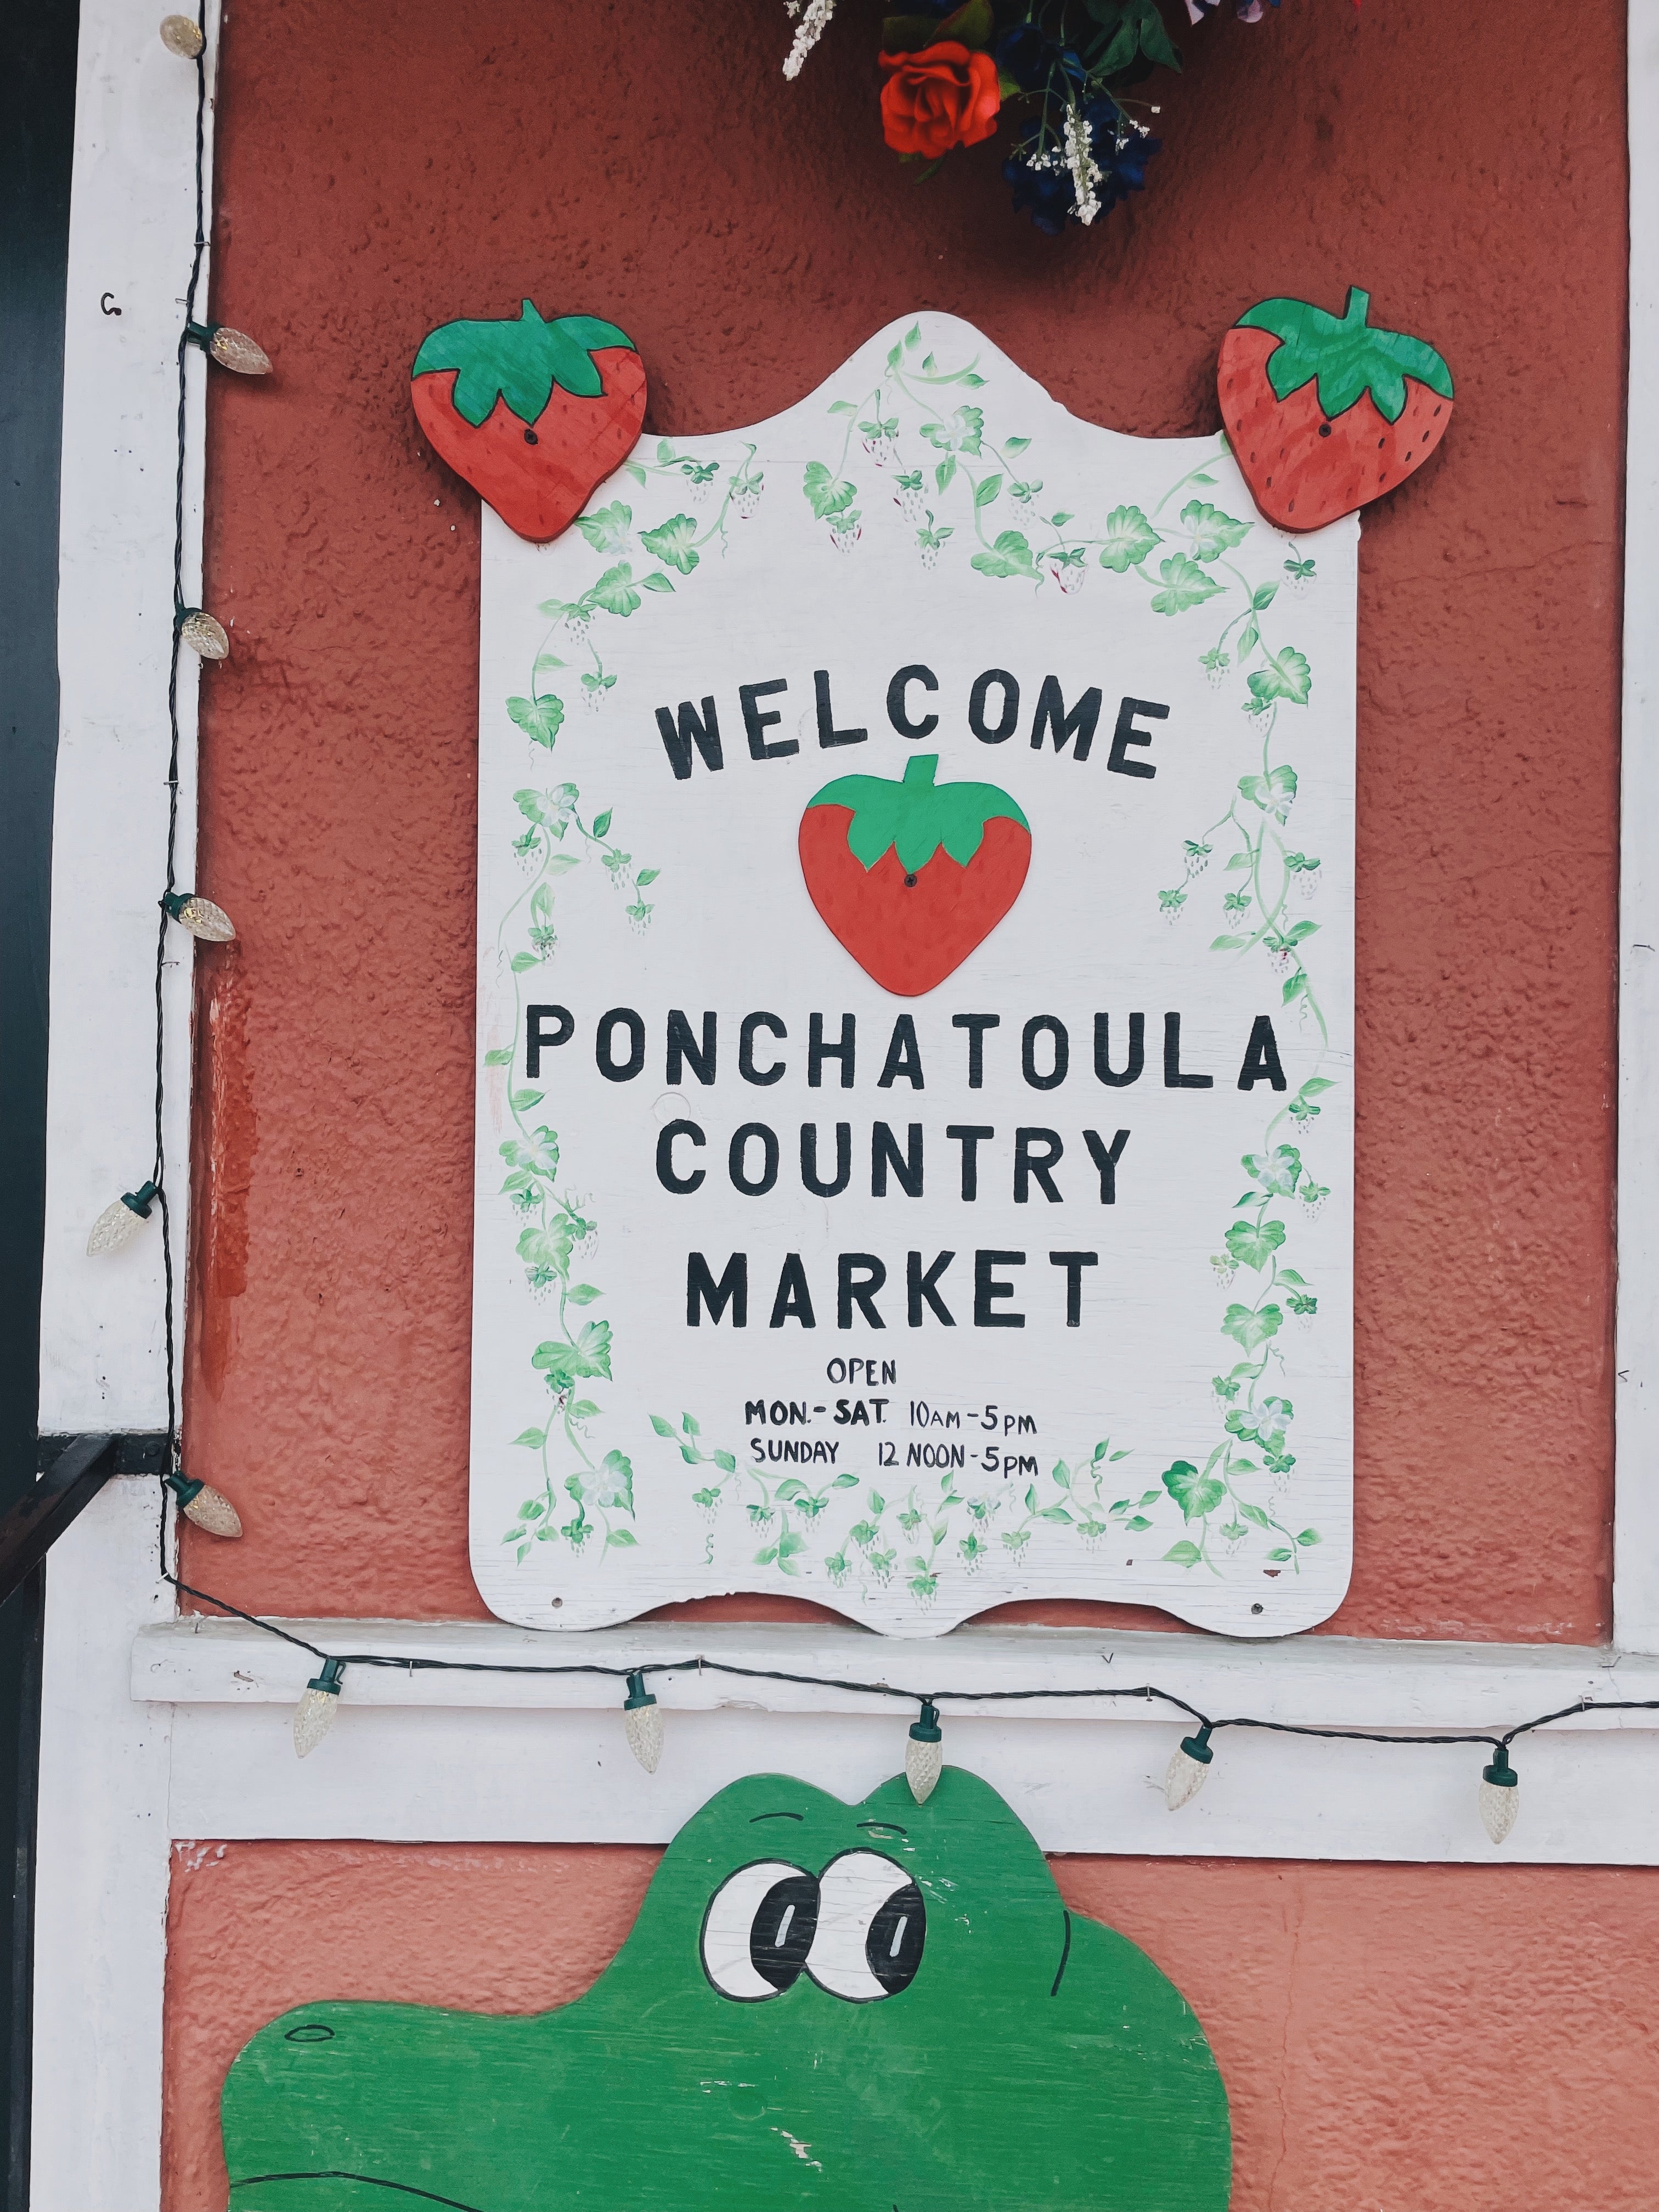 Exterior Signage for the Ponchatoula Country Market in Ponchatoula, Louisiana